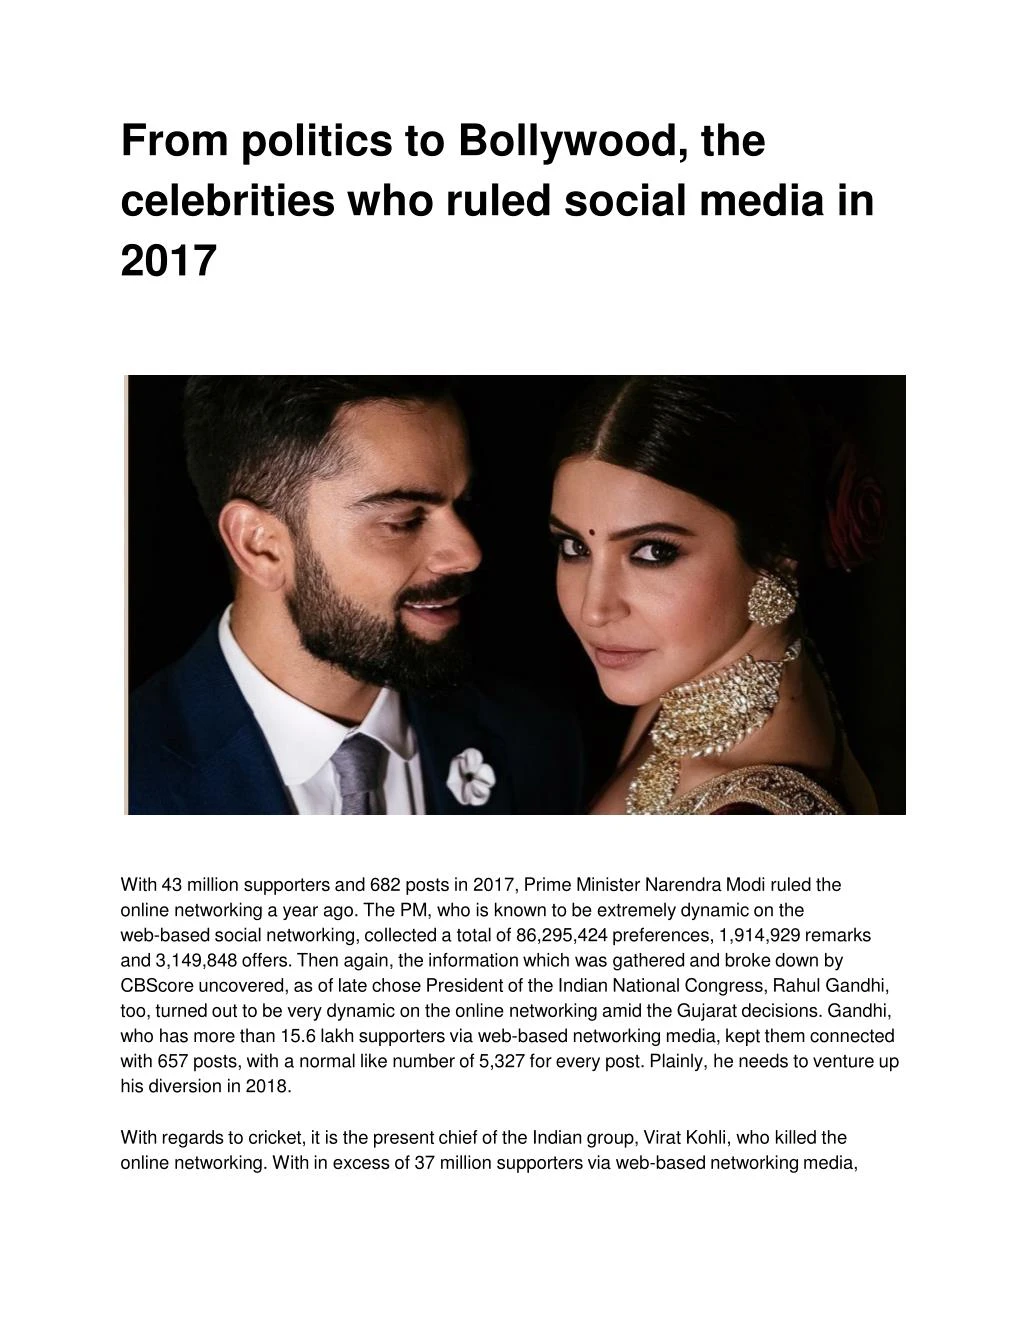 from politics to bollywood the celebrities who ruled social media in 2017